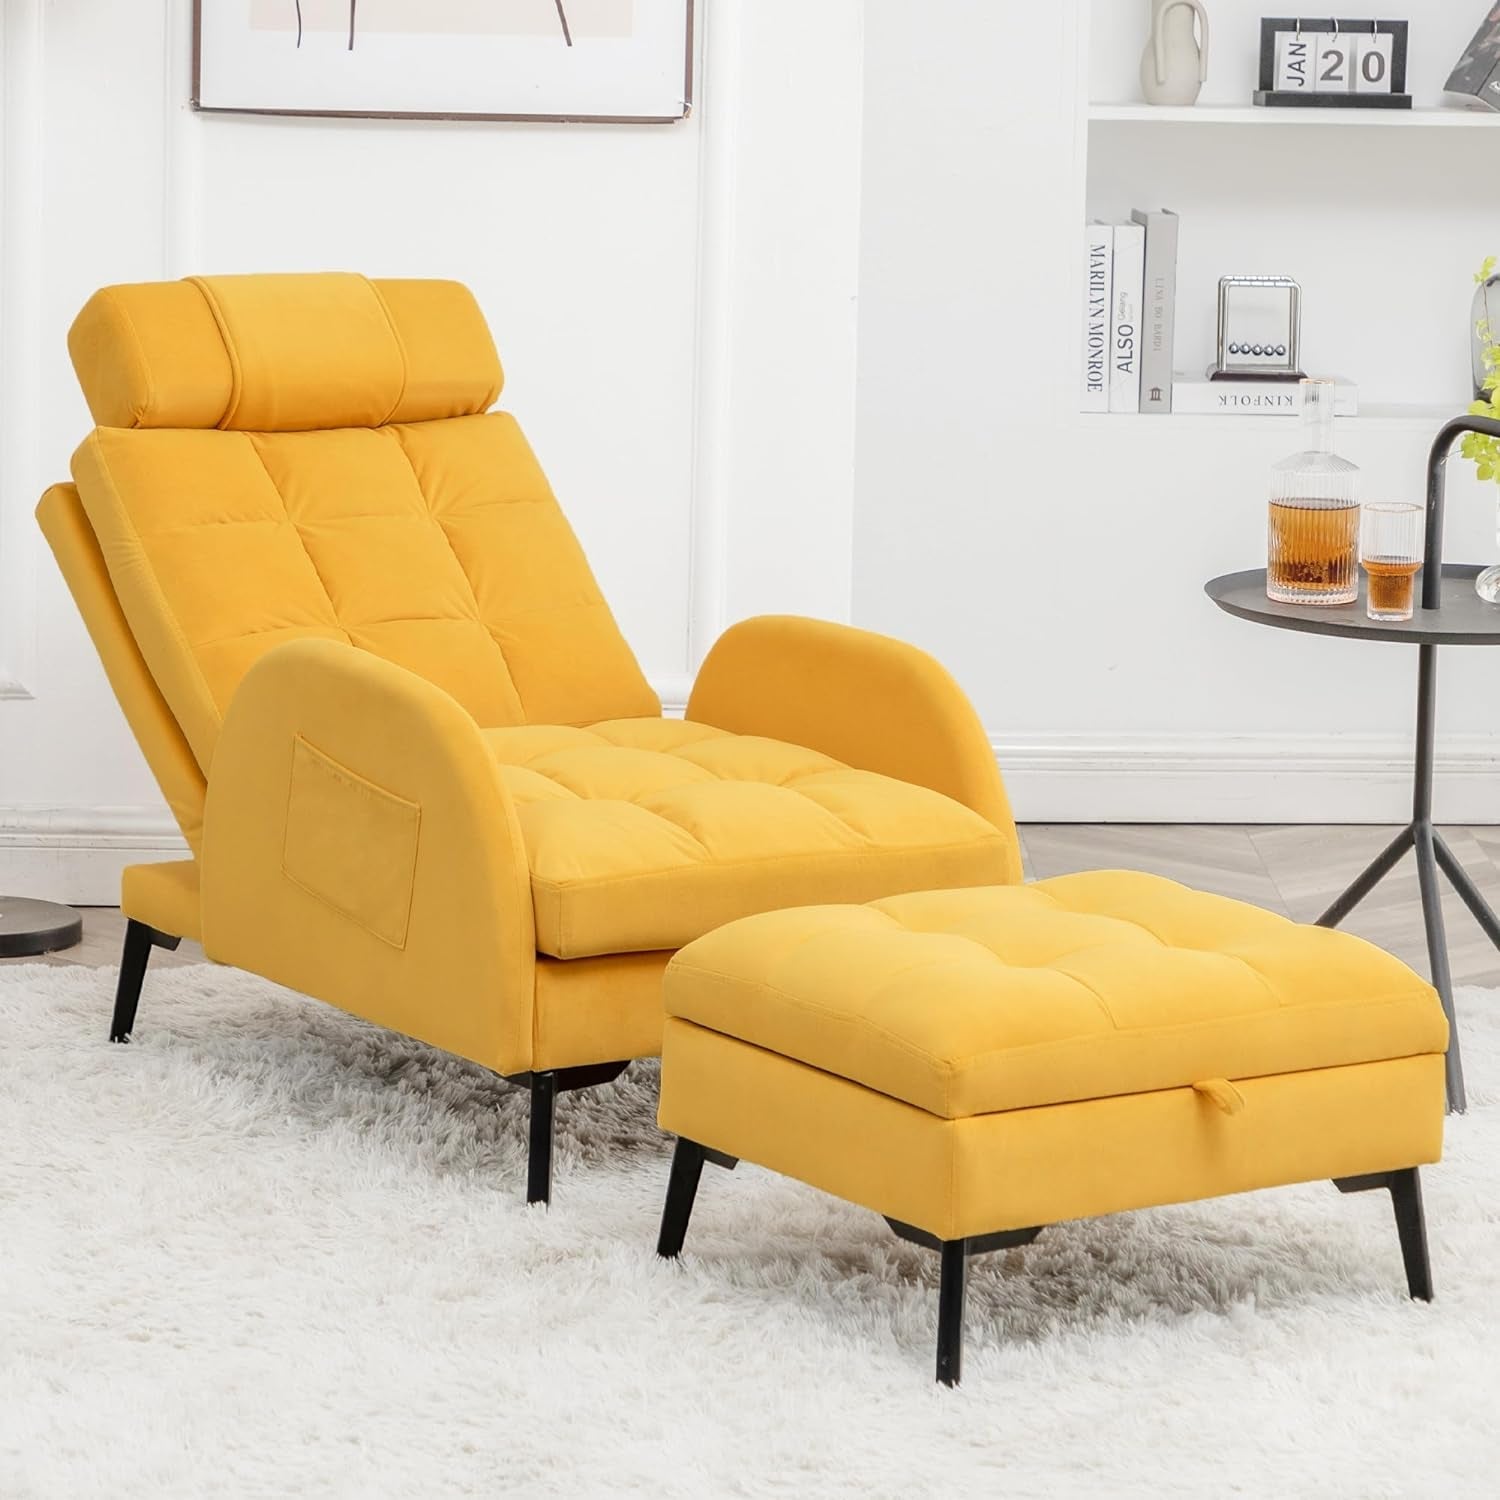 Accent Chair with Ottoman - Orange Reclining Reading Chair and Storage Ottoman Set Velvet Comfy Lounge Arm Chair with Adjustable Backrest Cozy Sofa for Living Room Bedroom